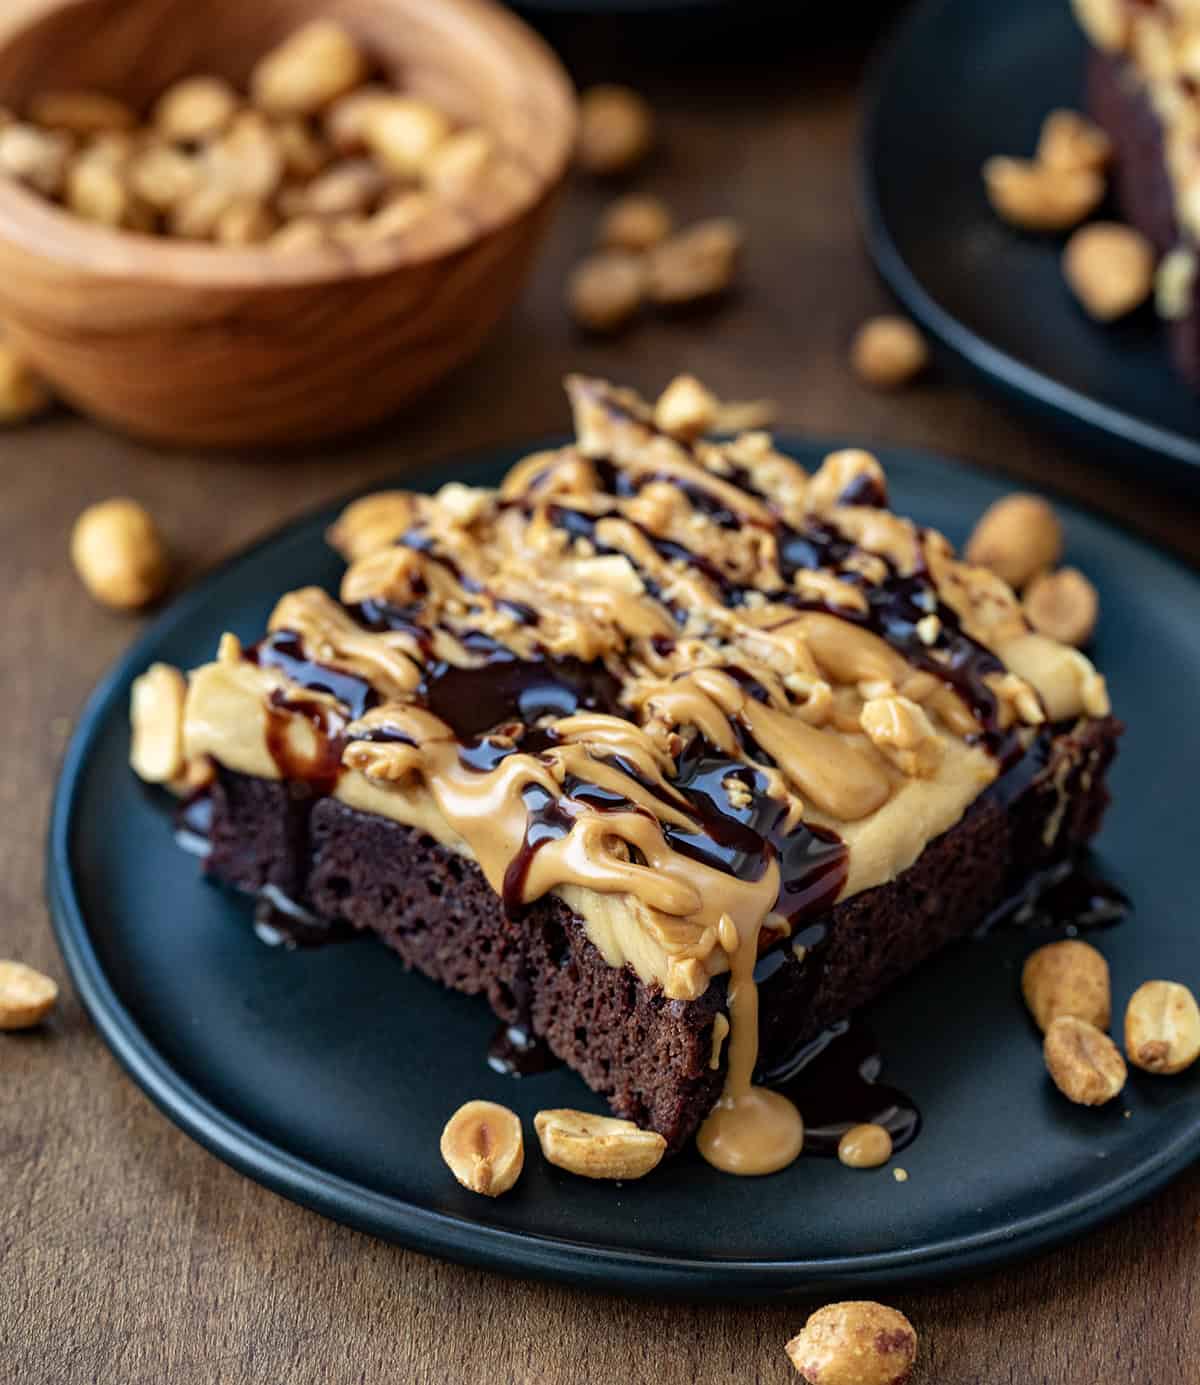 One Peanut Butter Mousse Brownie on a black plate with other brownies around.